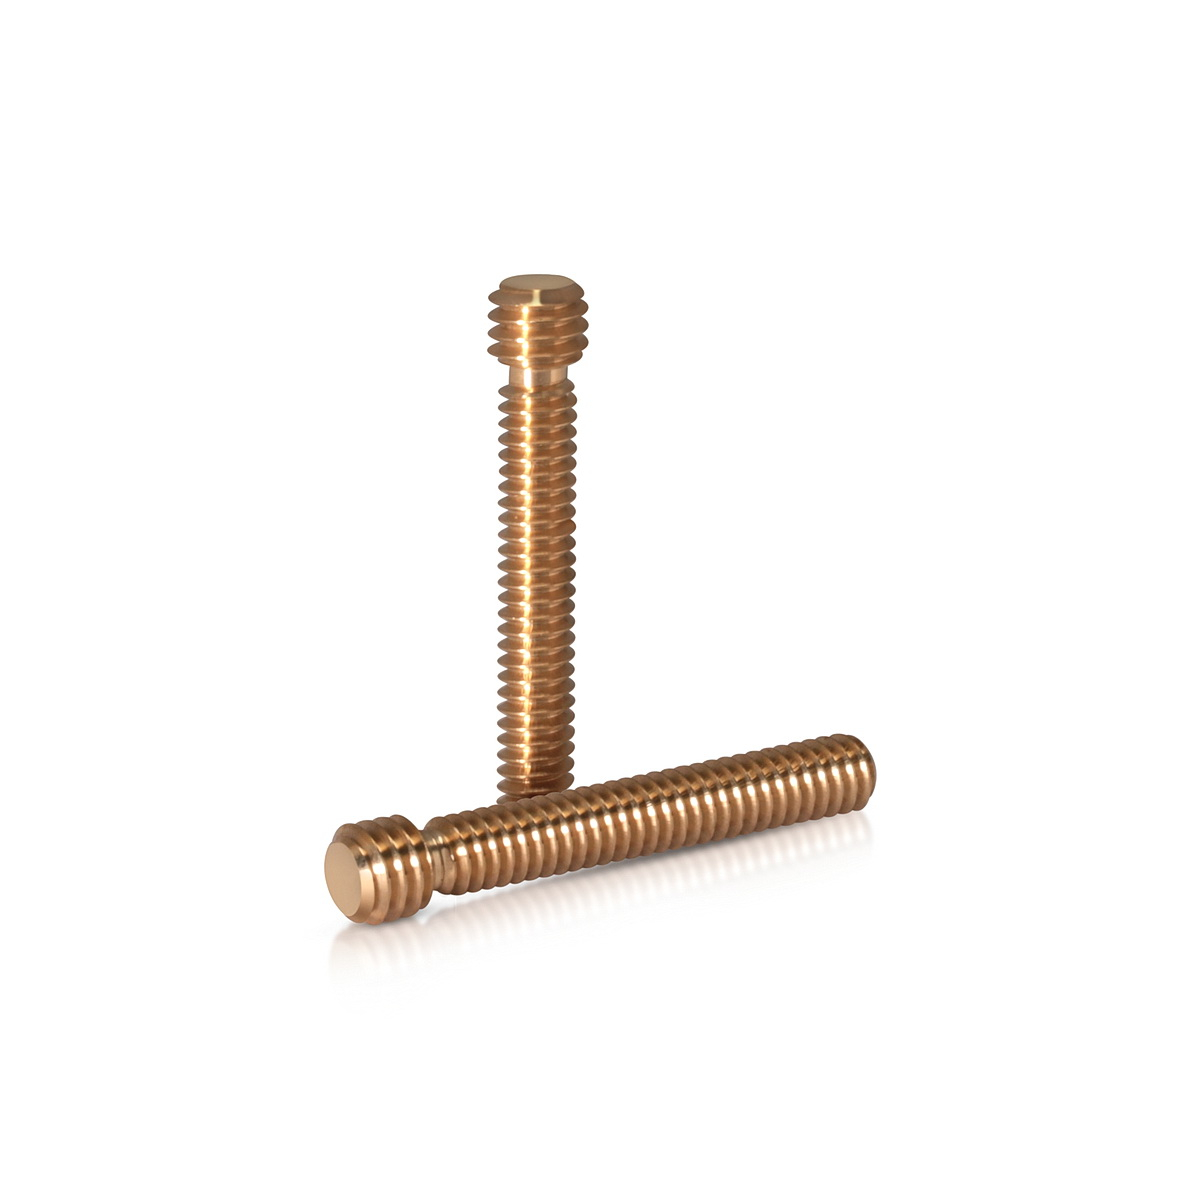 5/16-18 to 1/4-20 Conversion Set Screw, Total Length: 1 13/16''